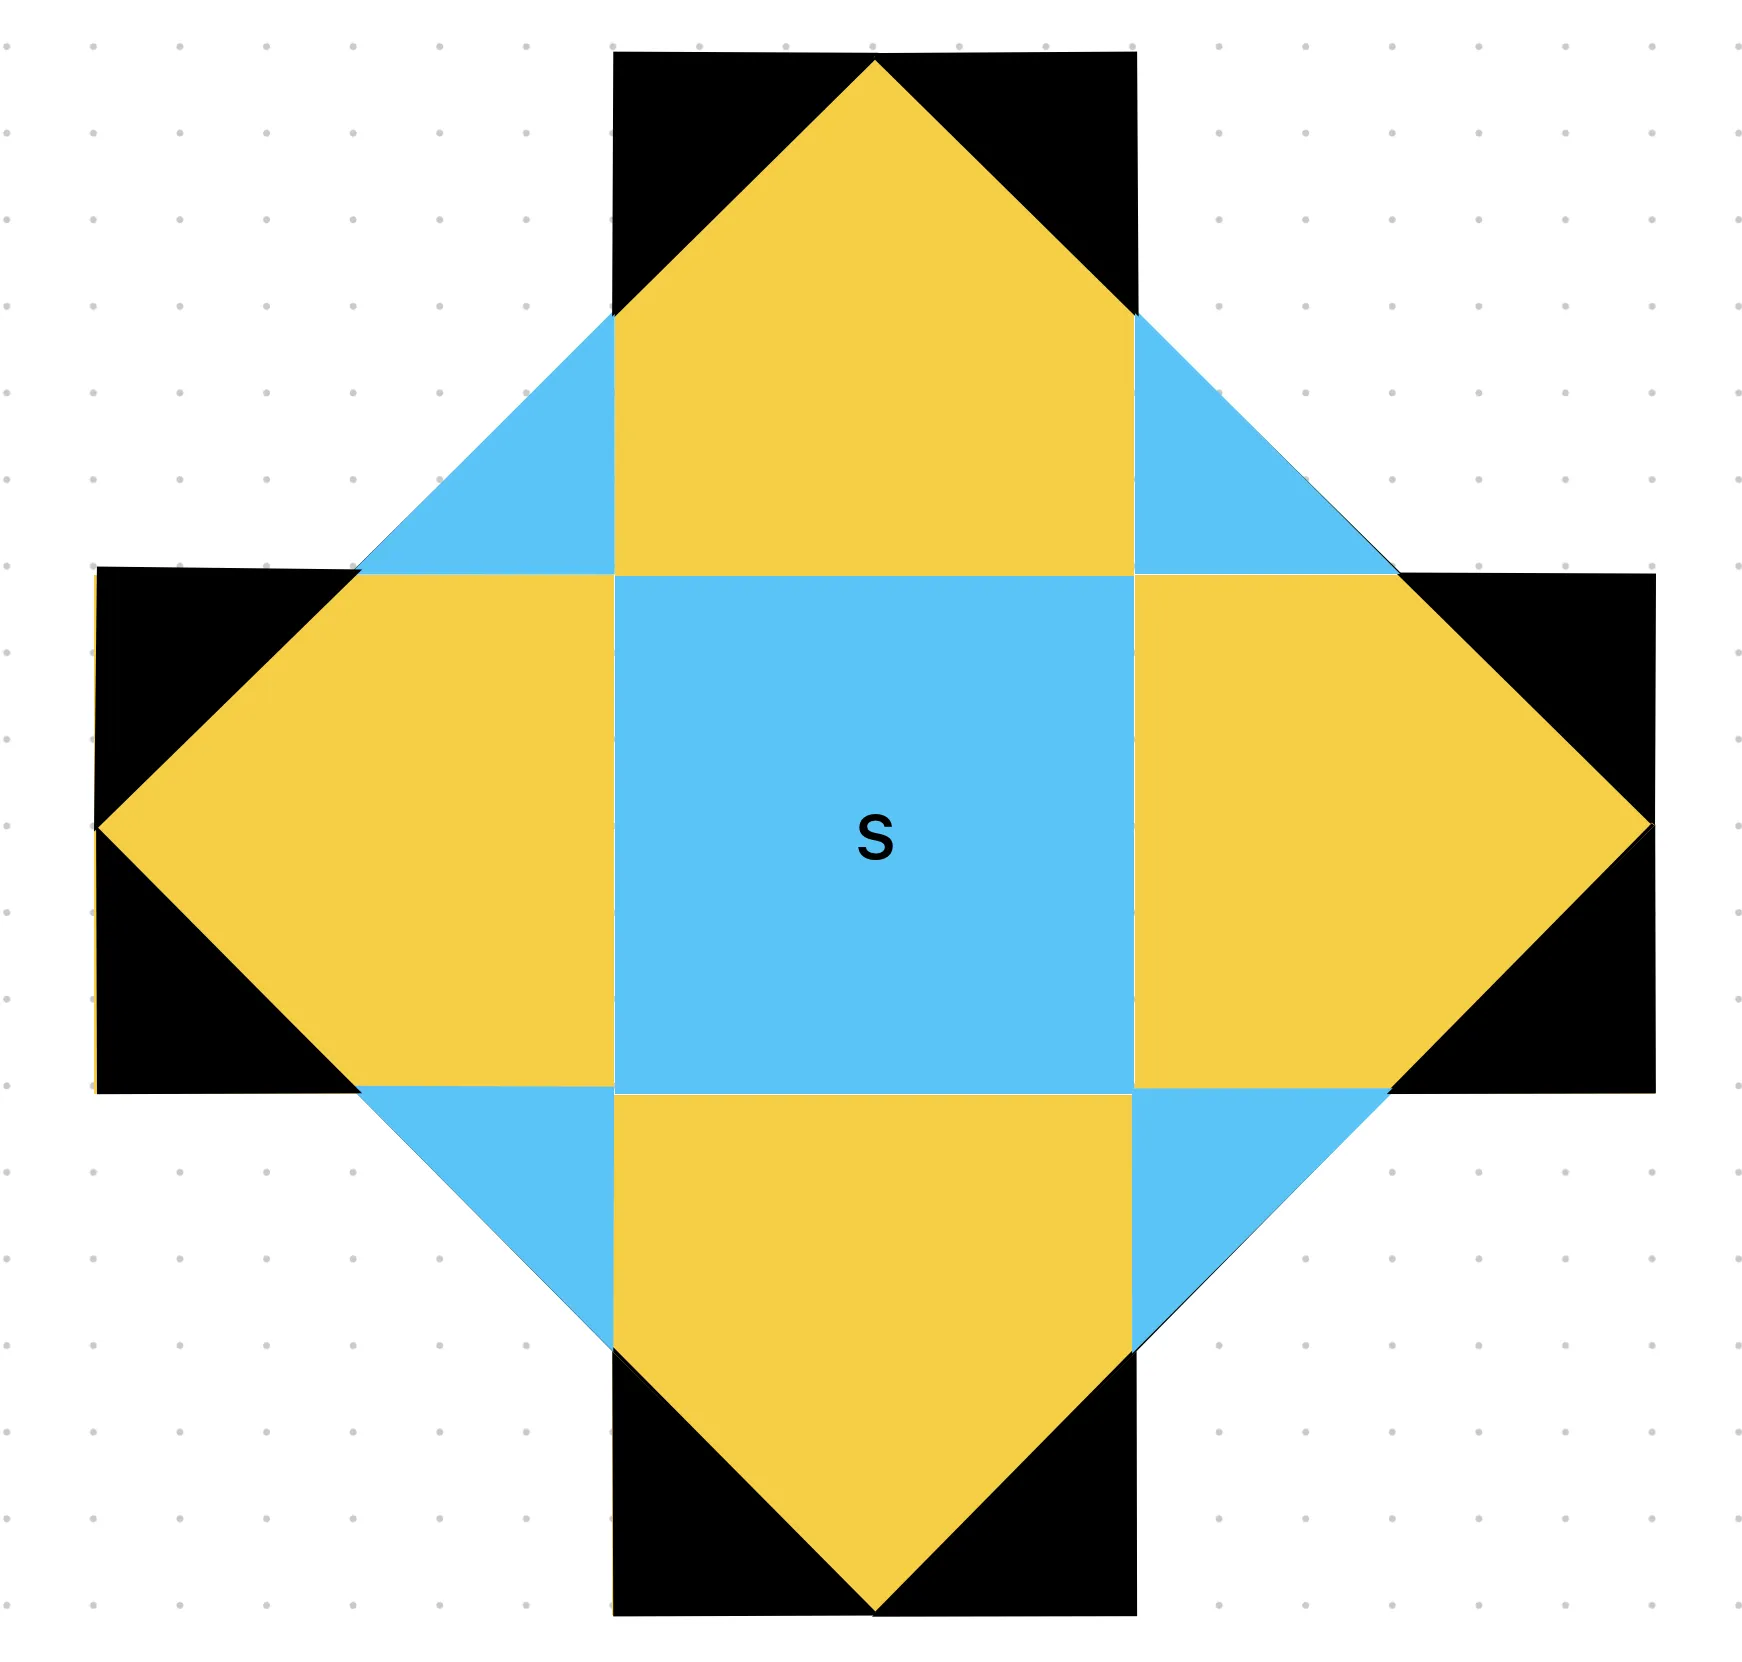 a grid with 5 squares, diamonds, and colored corners